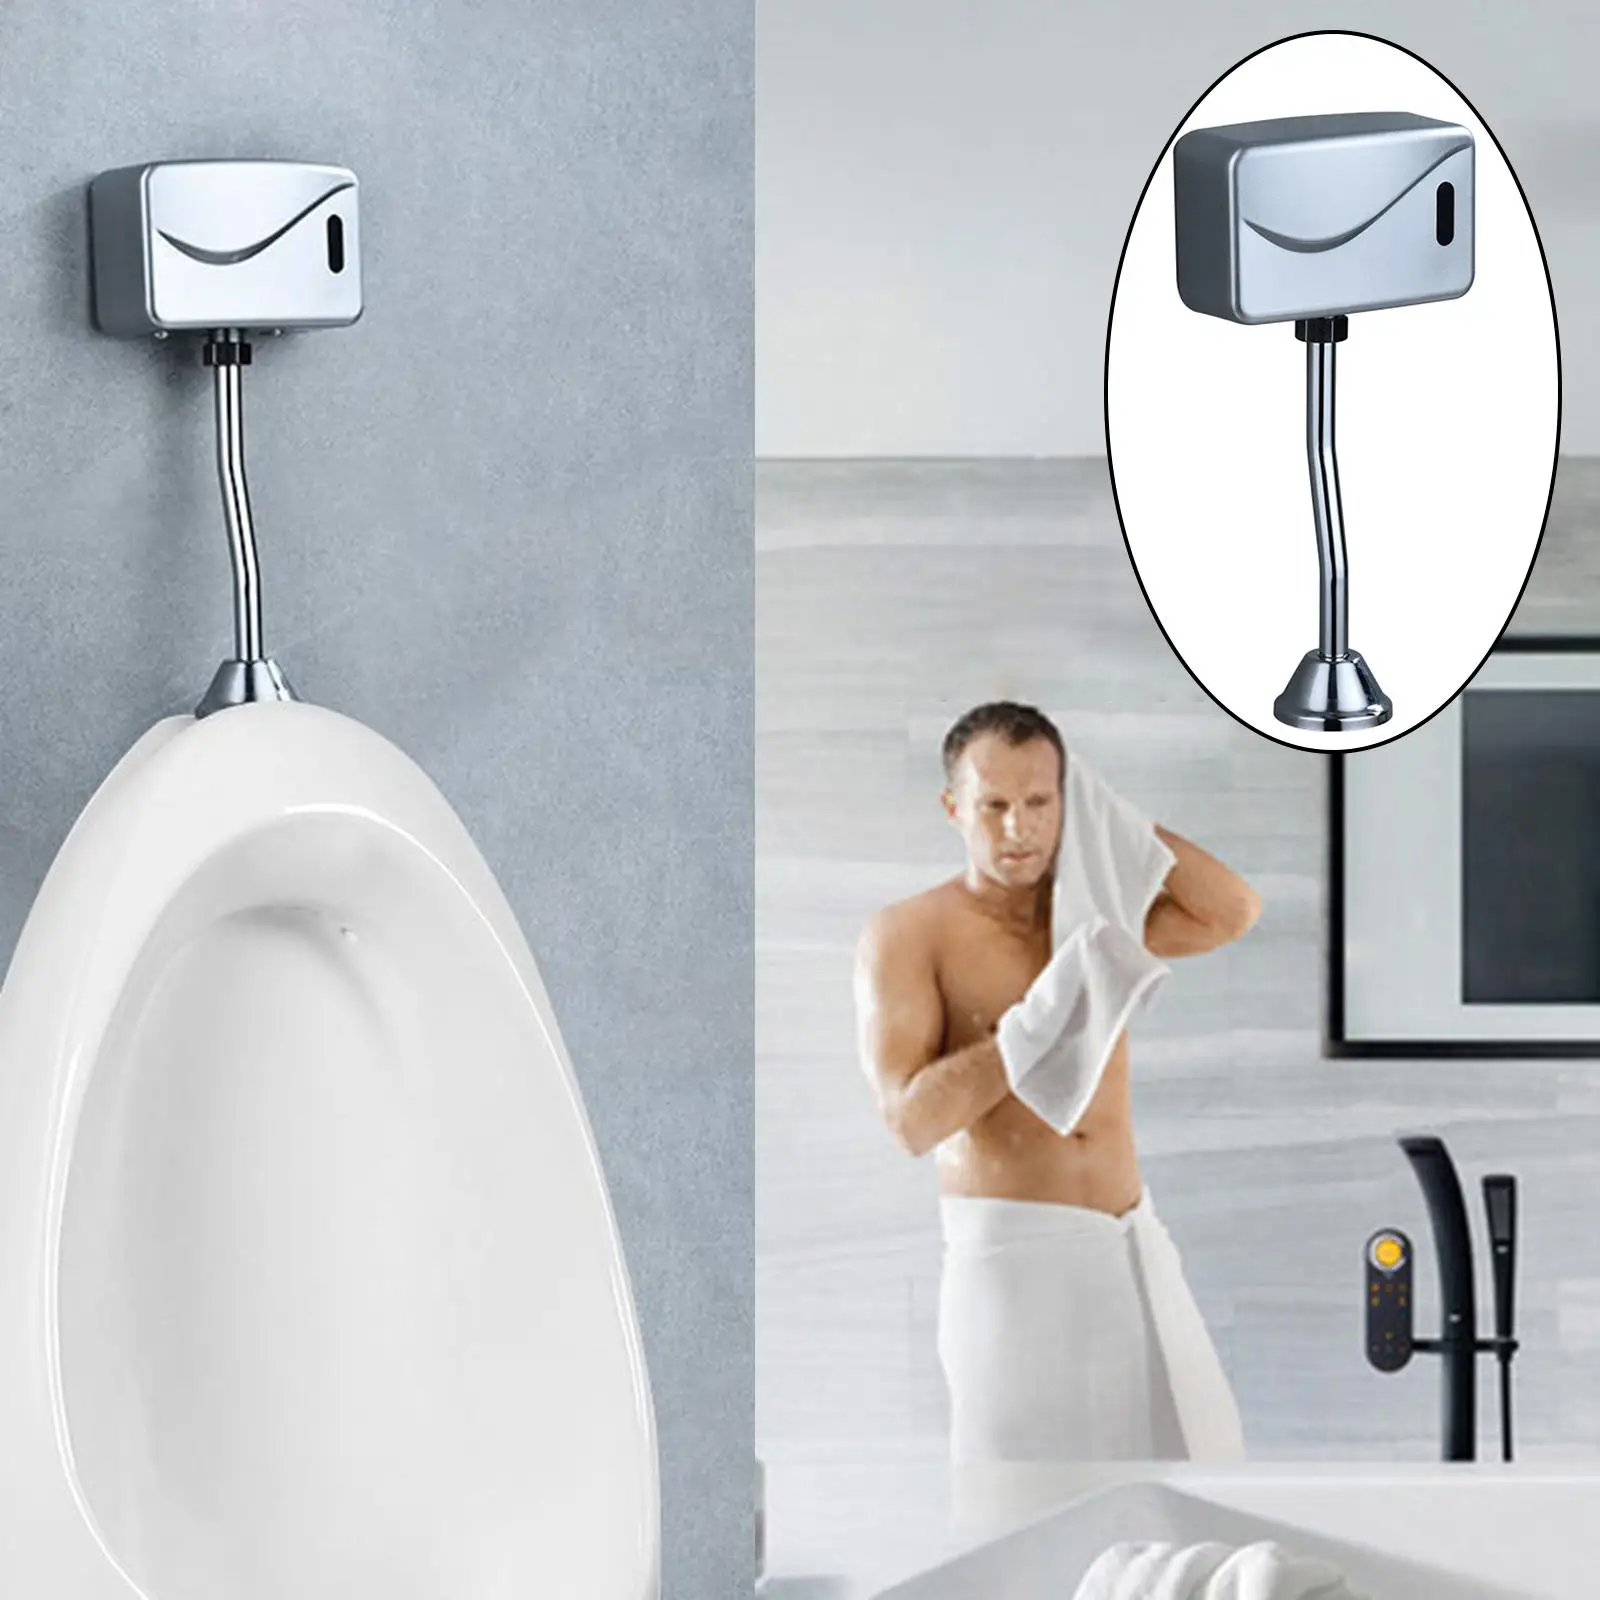 Automatic Urinal Flush Valve Wall Mounted Touch-Less Urinal Flush Valve Bathroom Toilet Home Kit Hose Controller Tank